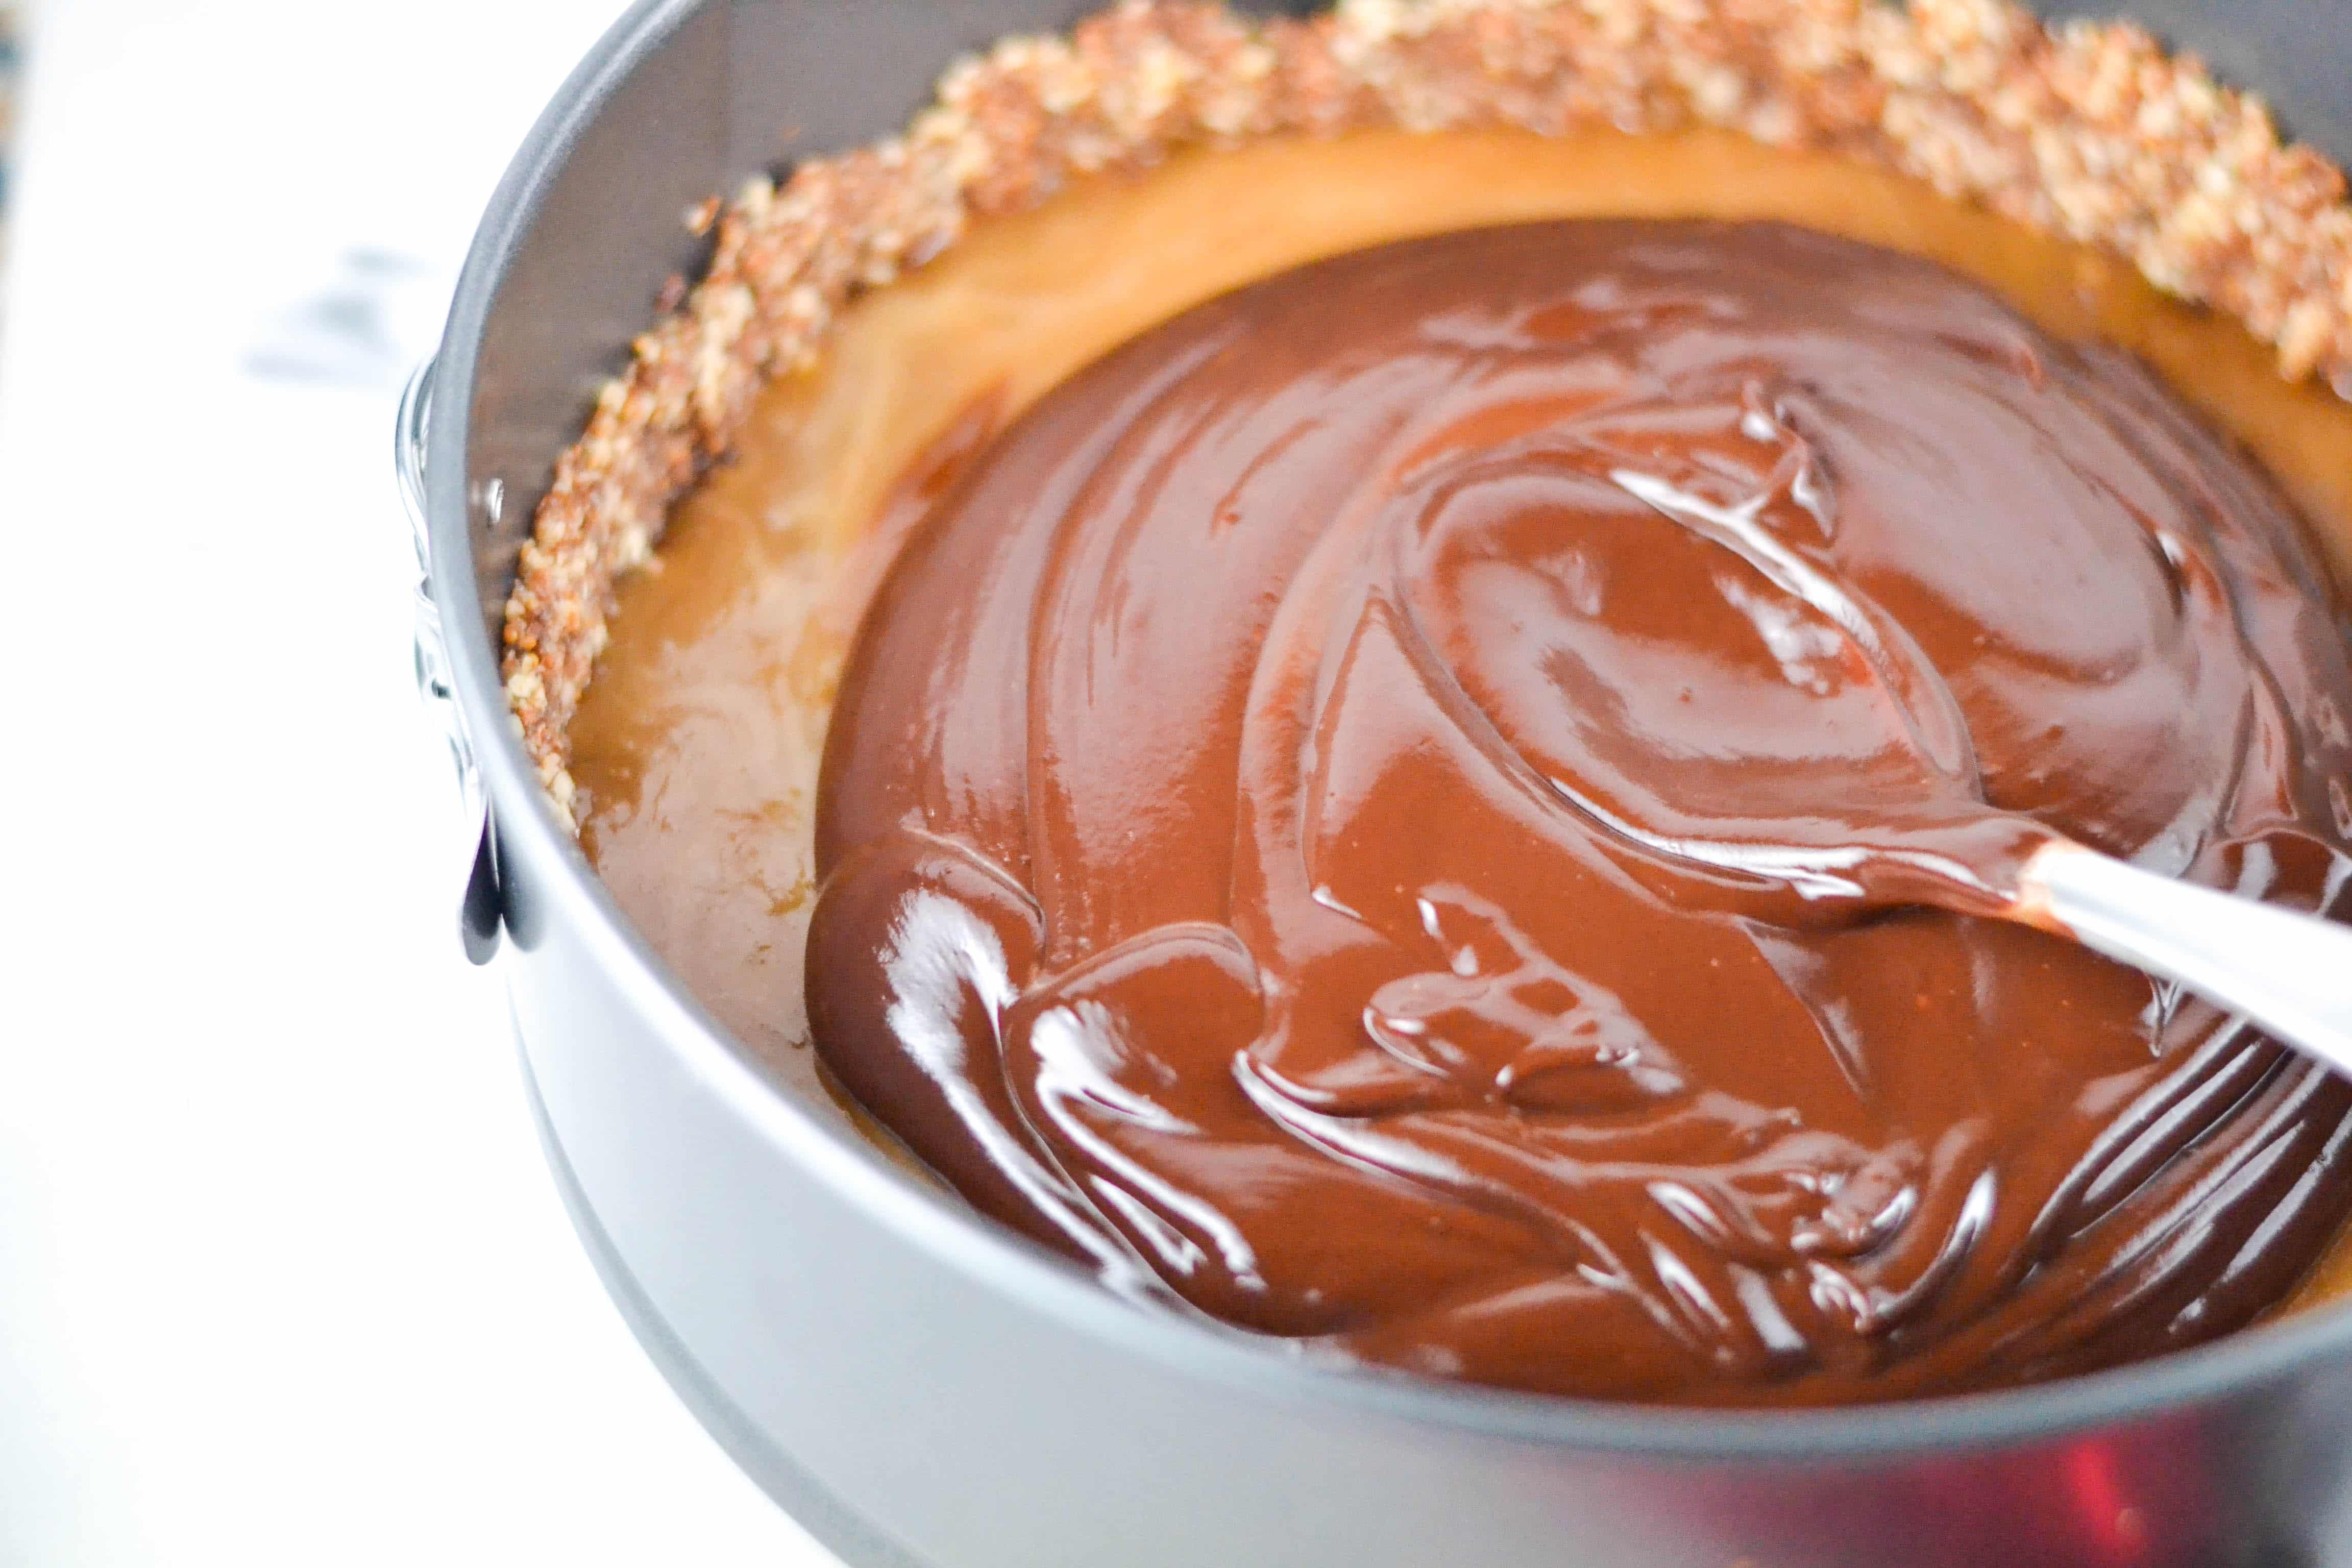 Chocolate ganache being spread with a spoon over a caramel filling and nut crust in a springform pan.  